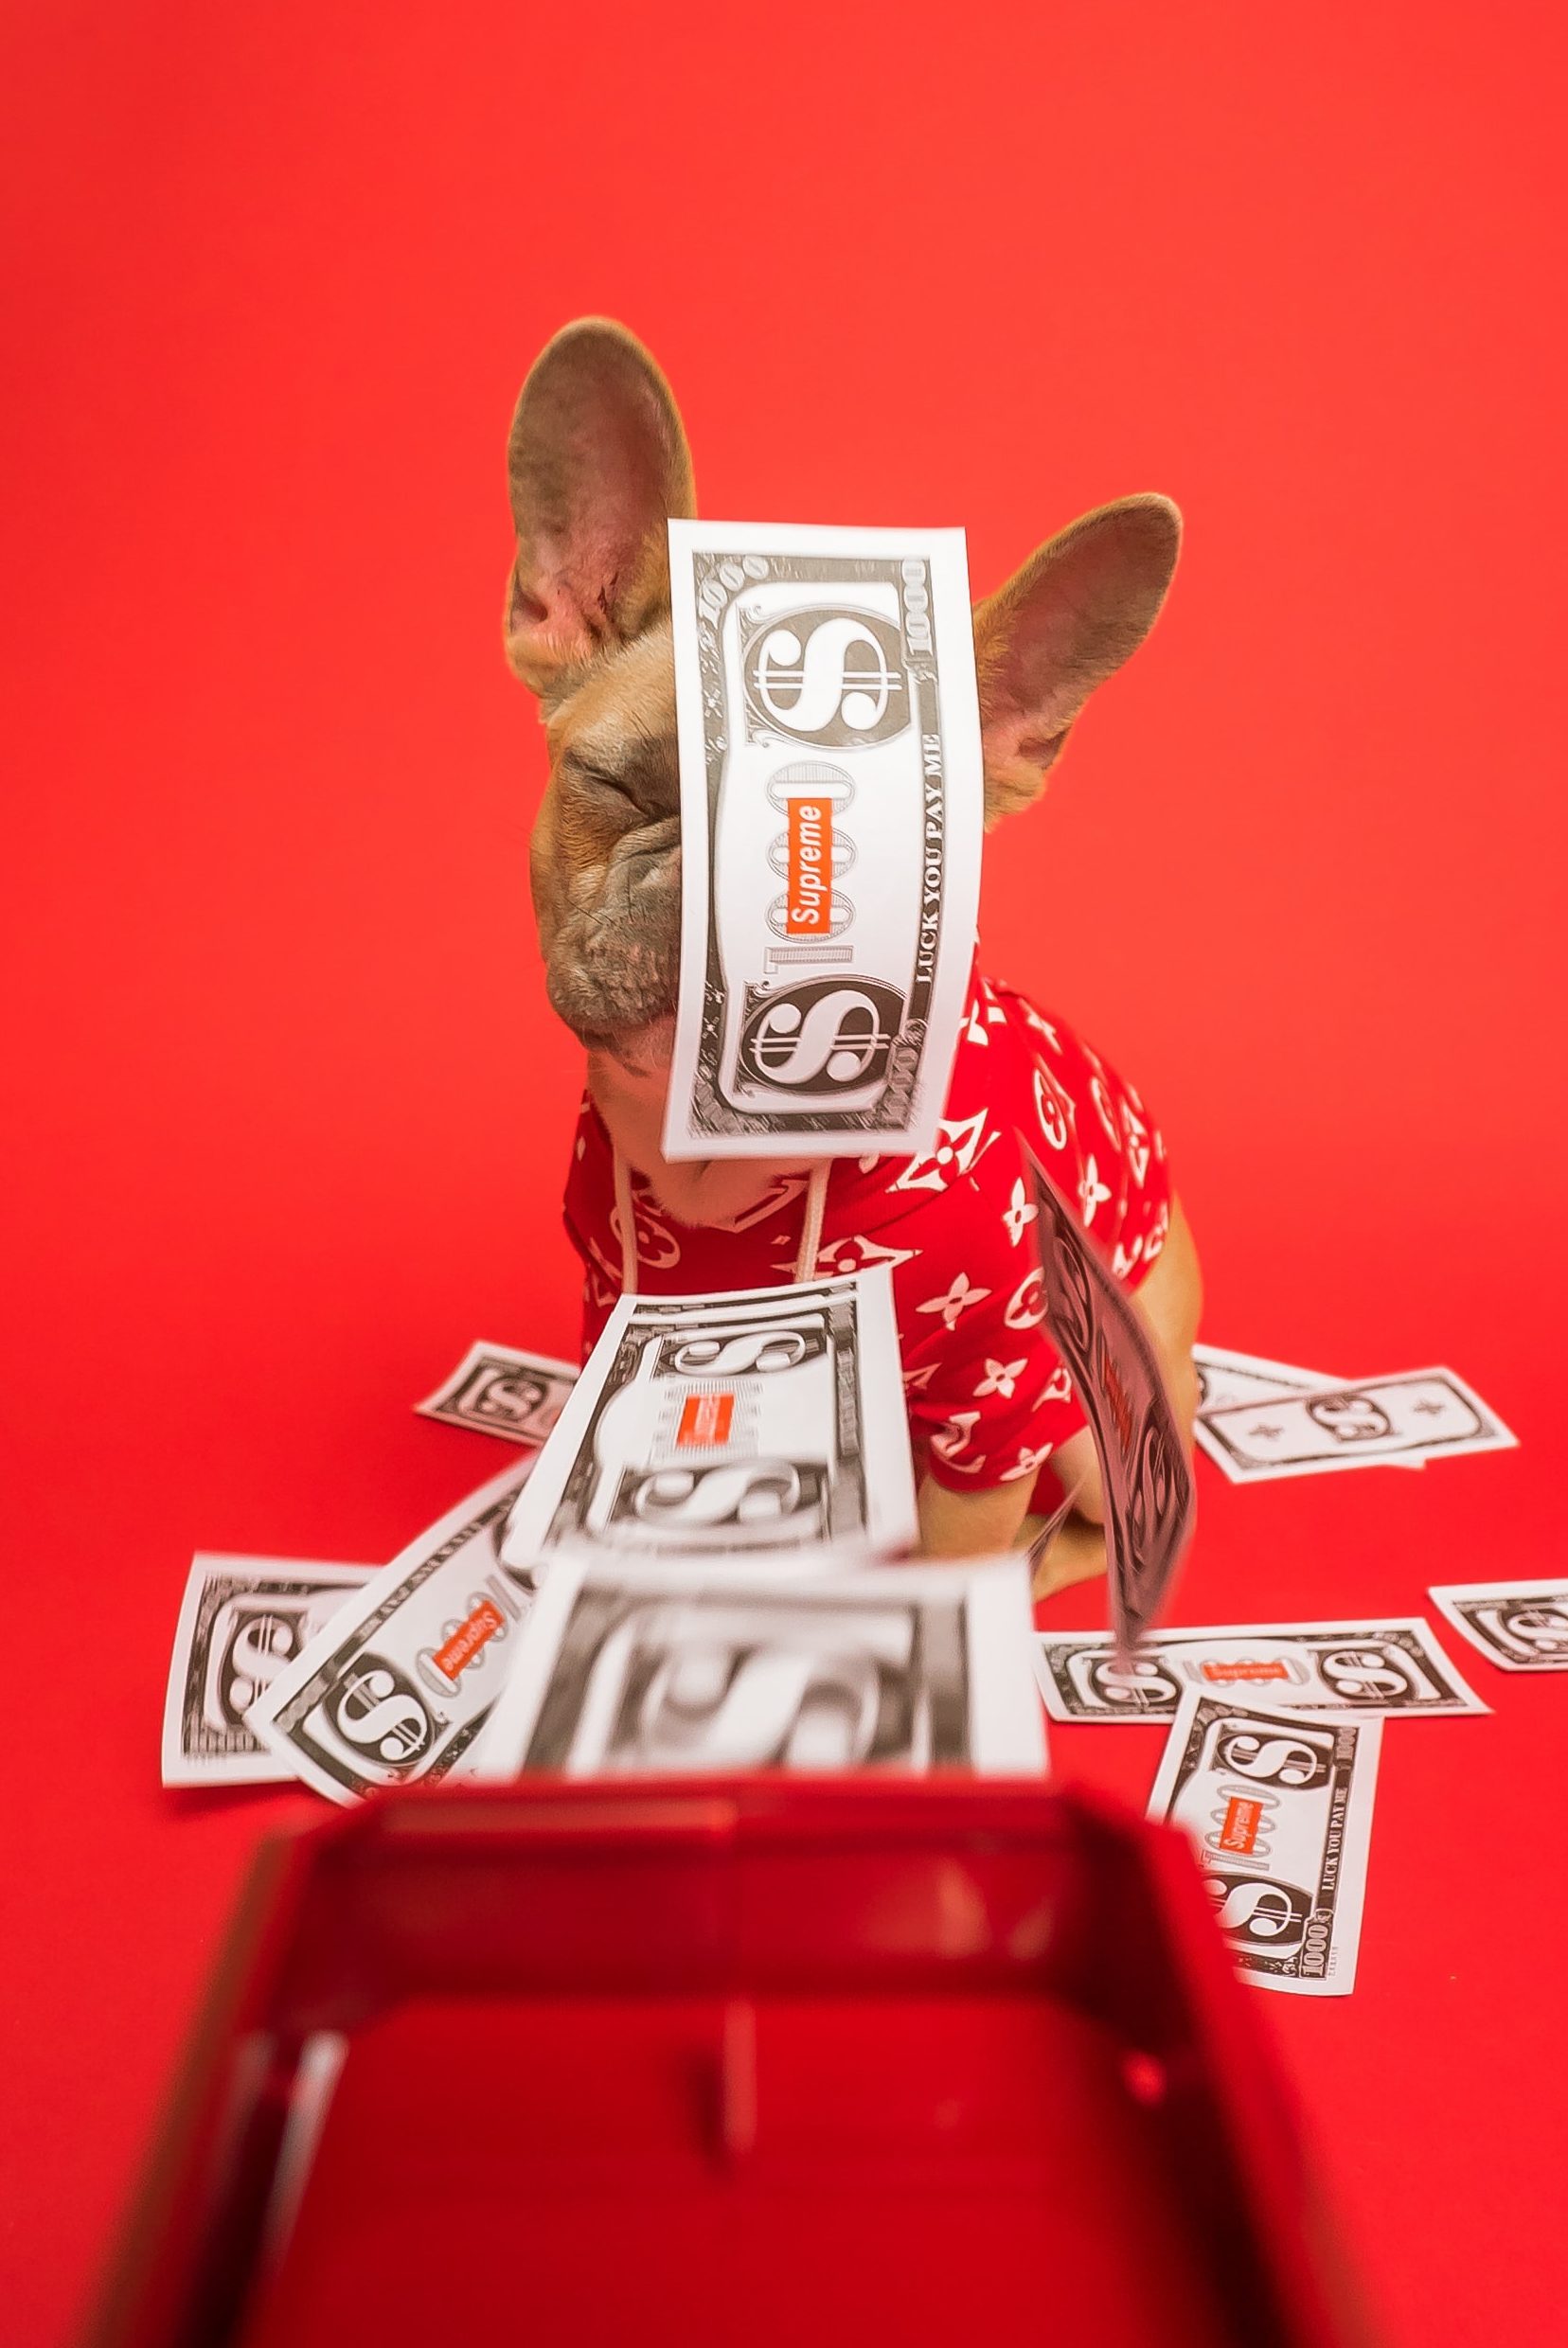 French Bulldog on a red background sitting with a money gun dispensing fake money at the dog.